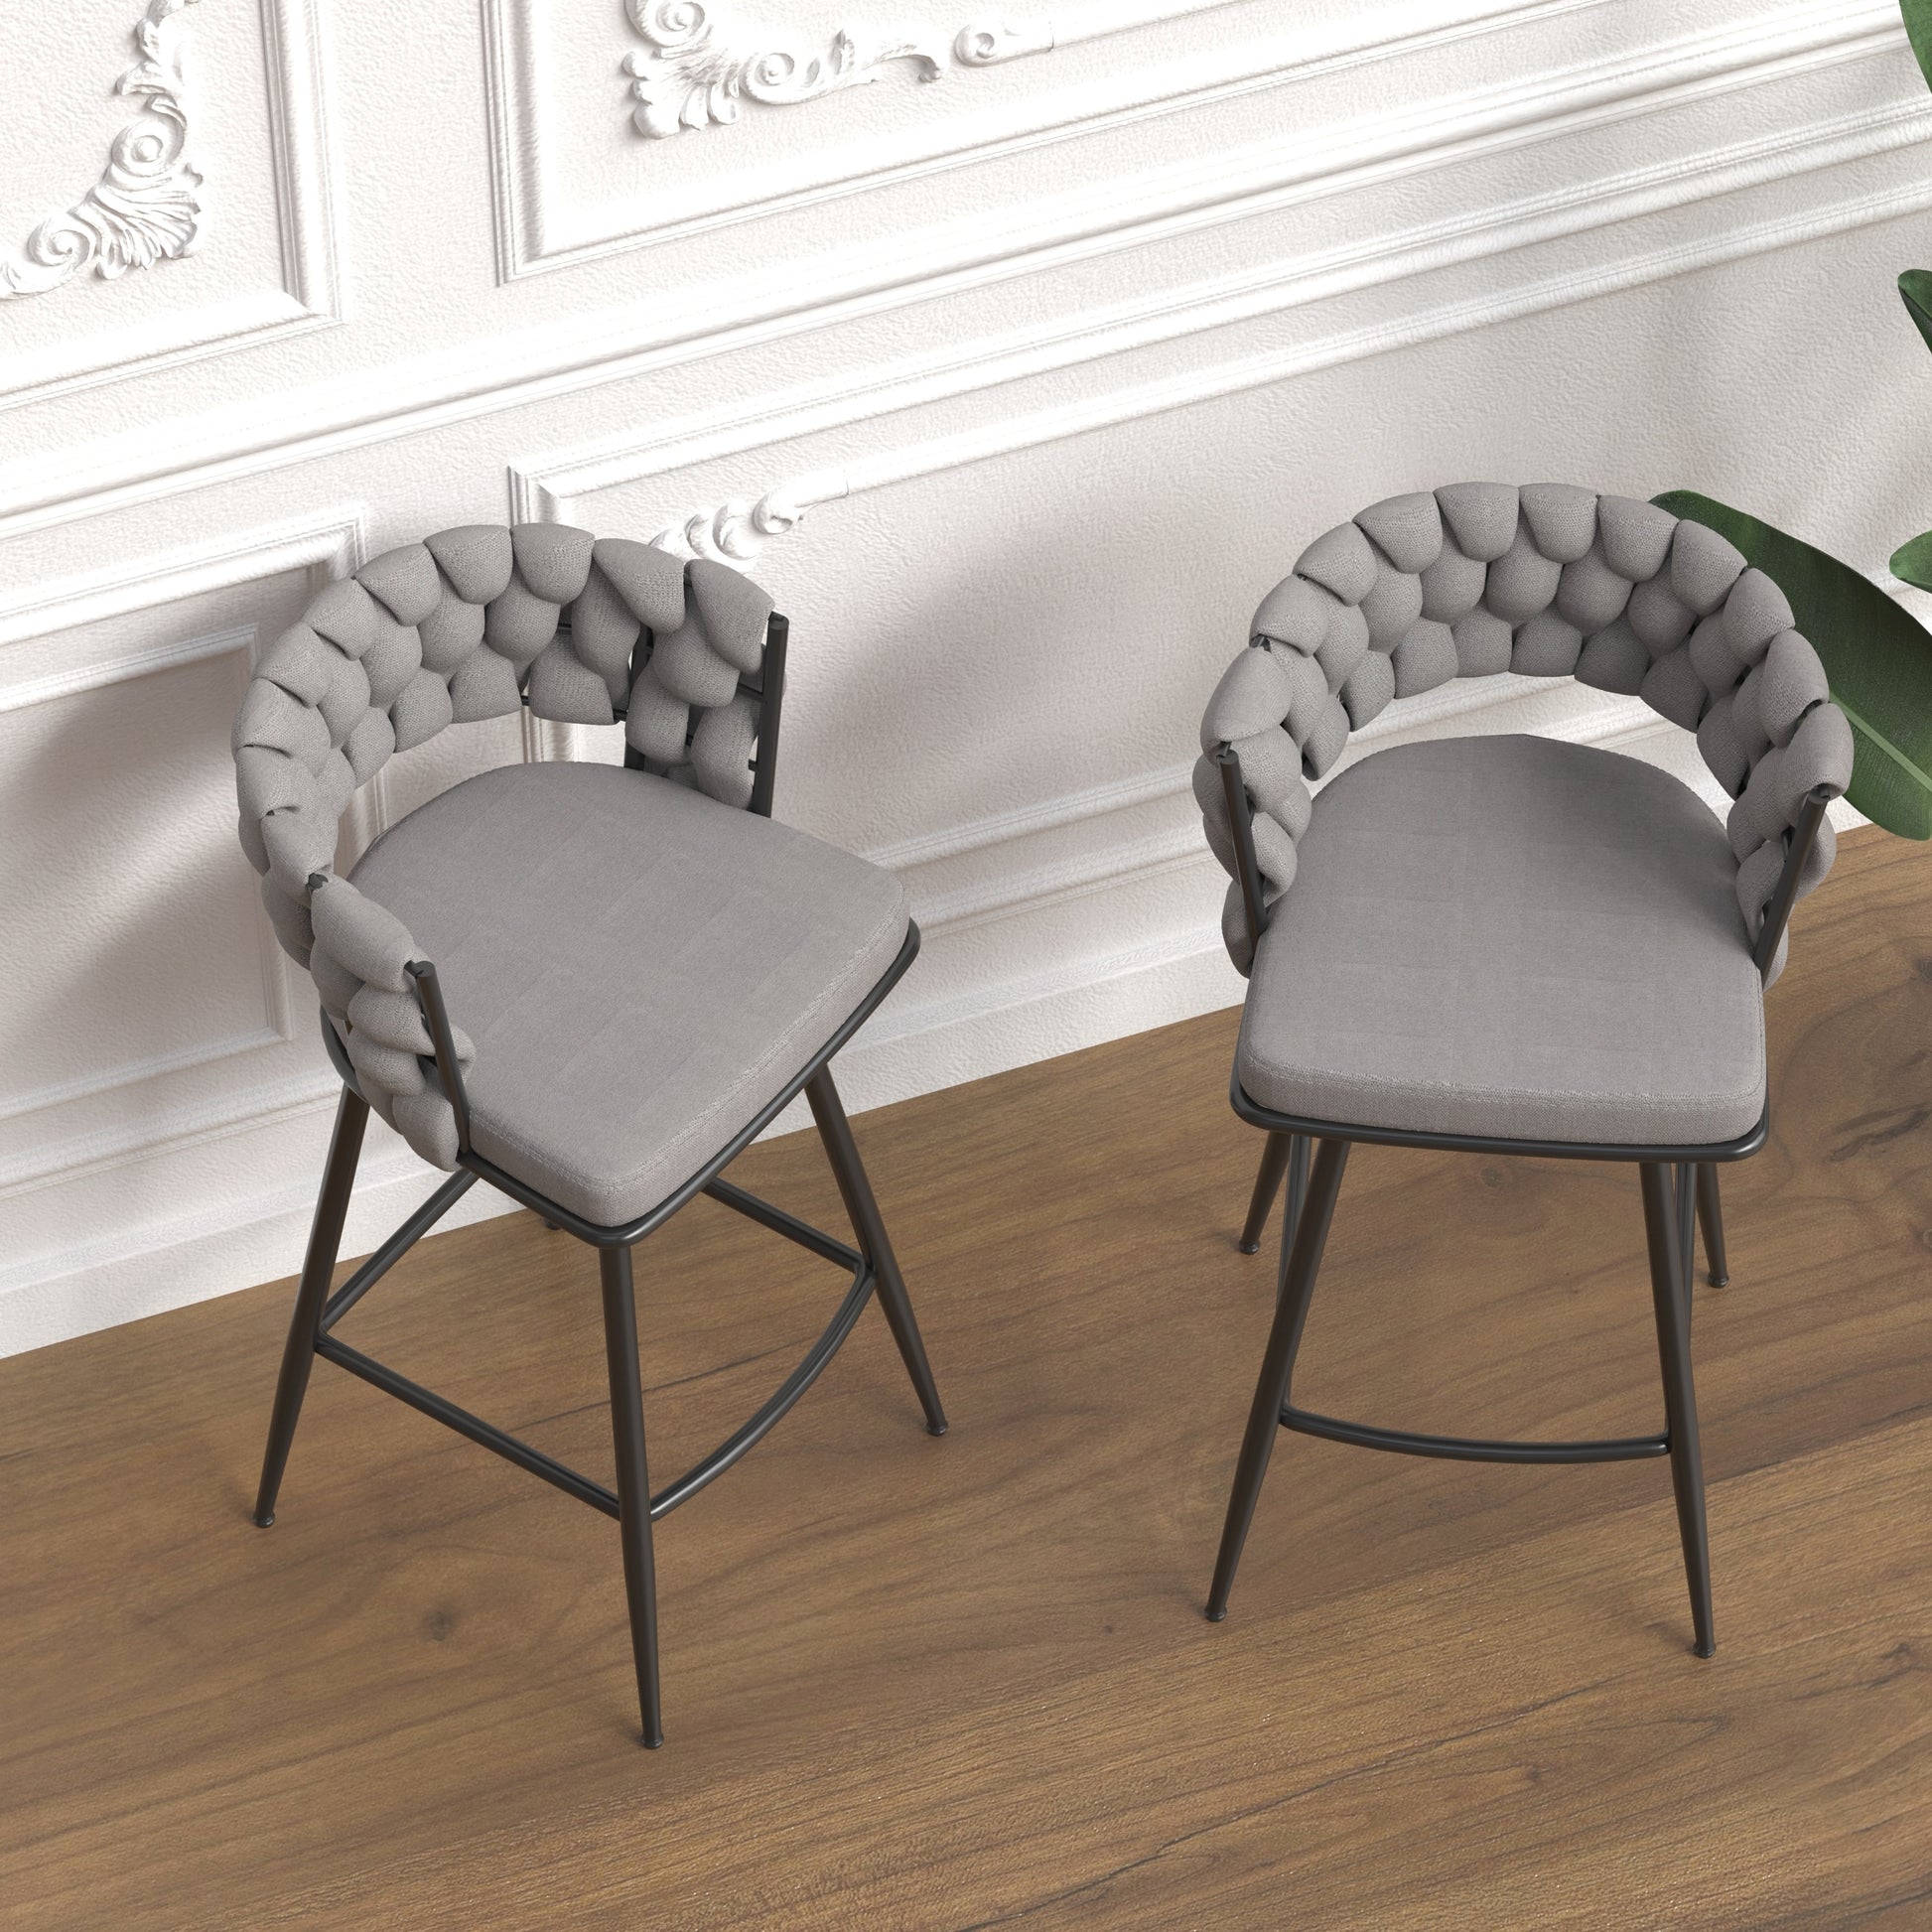 Bar Chair Linen Woven Bar Stool Set of 2,Black legs Barstools No Adjustable Kitchen Island Chairs,360 Swivel Bar Stools Upholstered Bar Chair Counter Stool Arm Chairs with Back Footrest, (Grey) - Enova Luxe Home Store